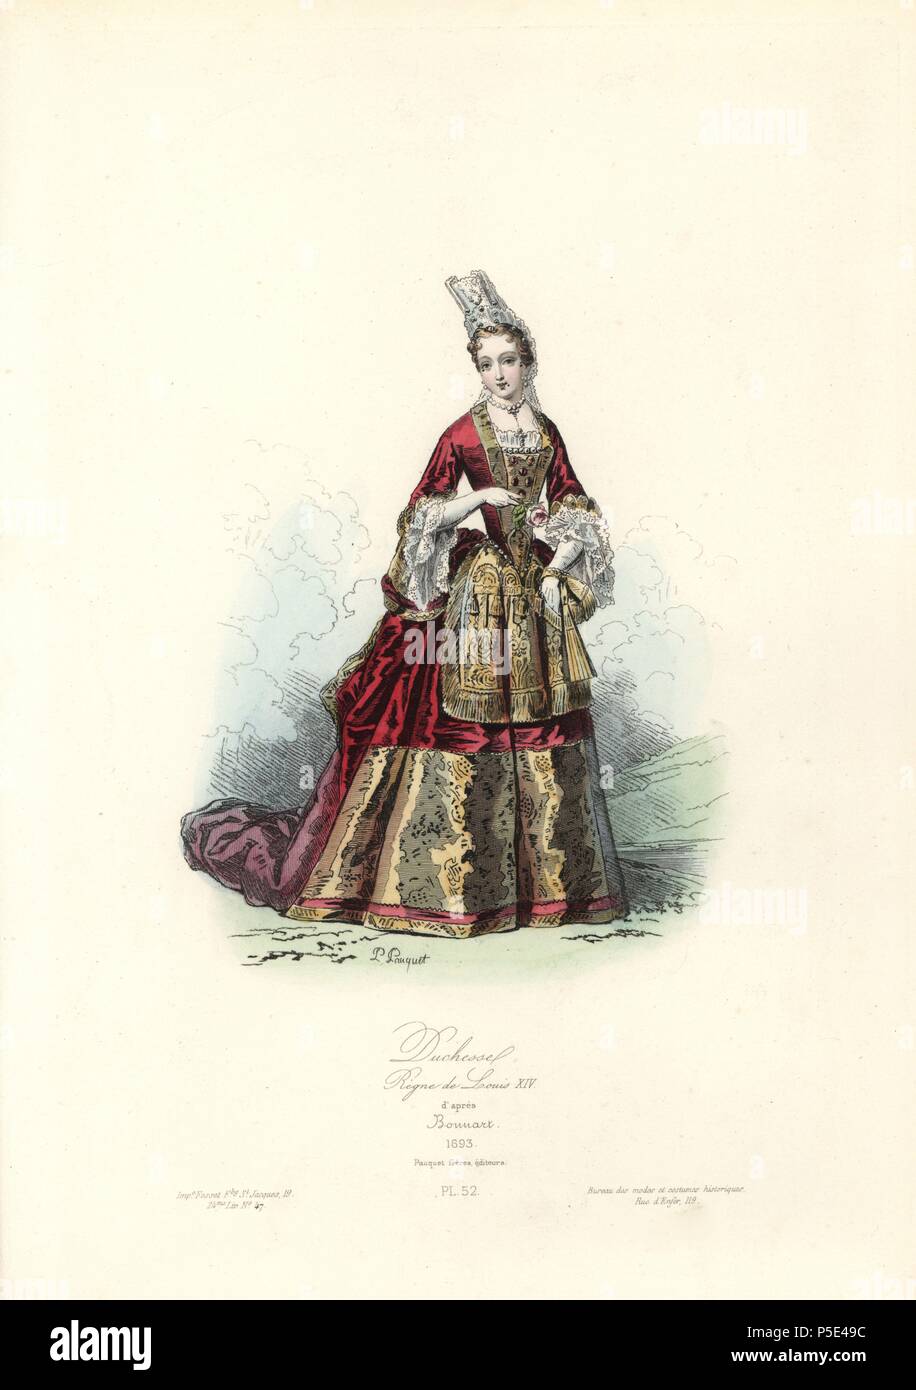 Duchess, reign of Louis XIV, 1693. Handcoloured steel engraving by Polidor Pauquet after Jean-Baptiste Bonnart (1654-1726) from the Pauquet Brothers' 'Modes et Costumes Historiques' (Historical Fashions and Costumes), Paris, 1865. Hippolyte (b. 1797) and Polydor Pauquet (b. 1799) ran a successful publishing house in Paris in the 19th century, specializing in illustrated books on costume, birds, butterflies, anatomy and natural history. Stock Photo